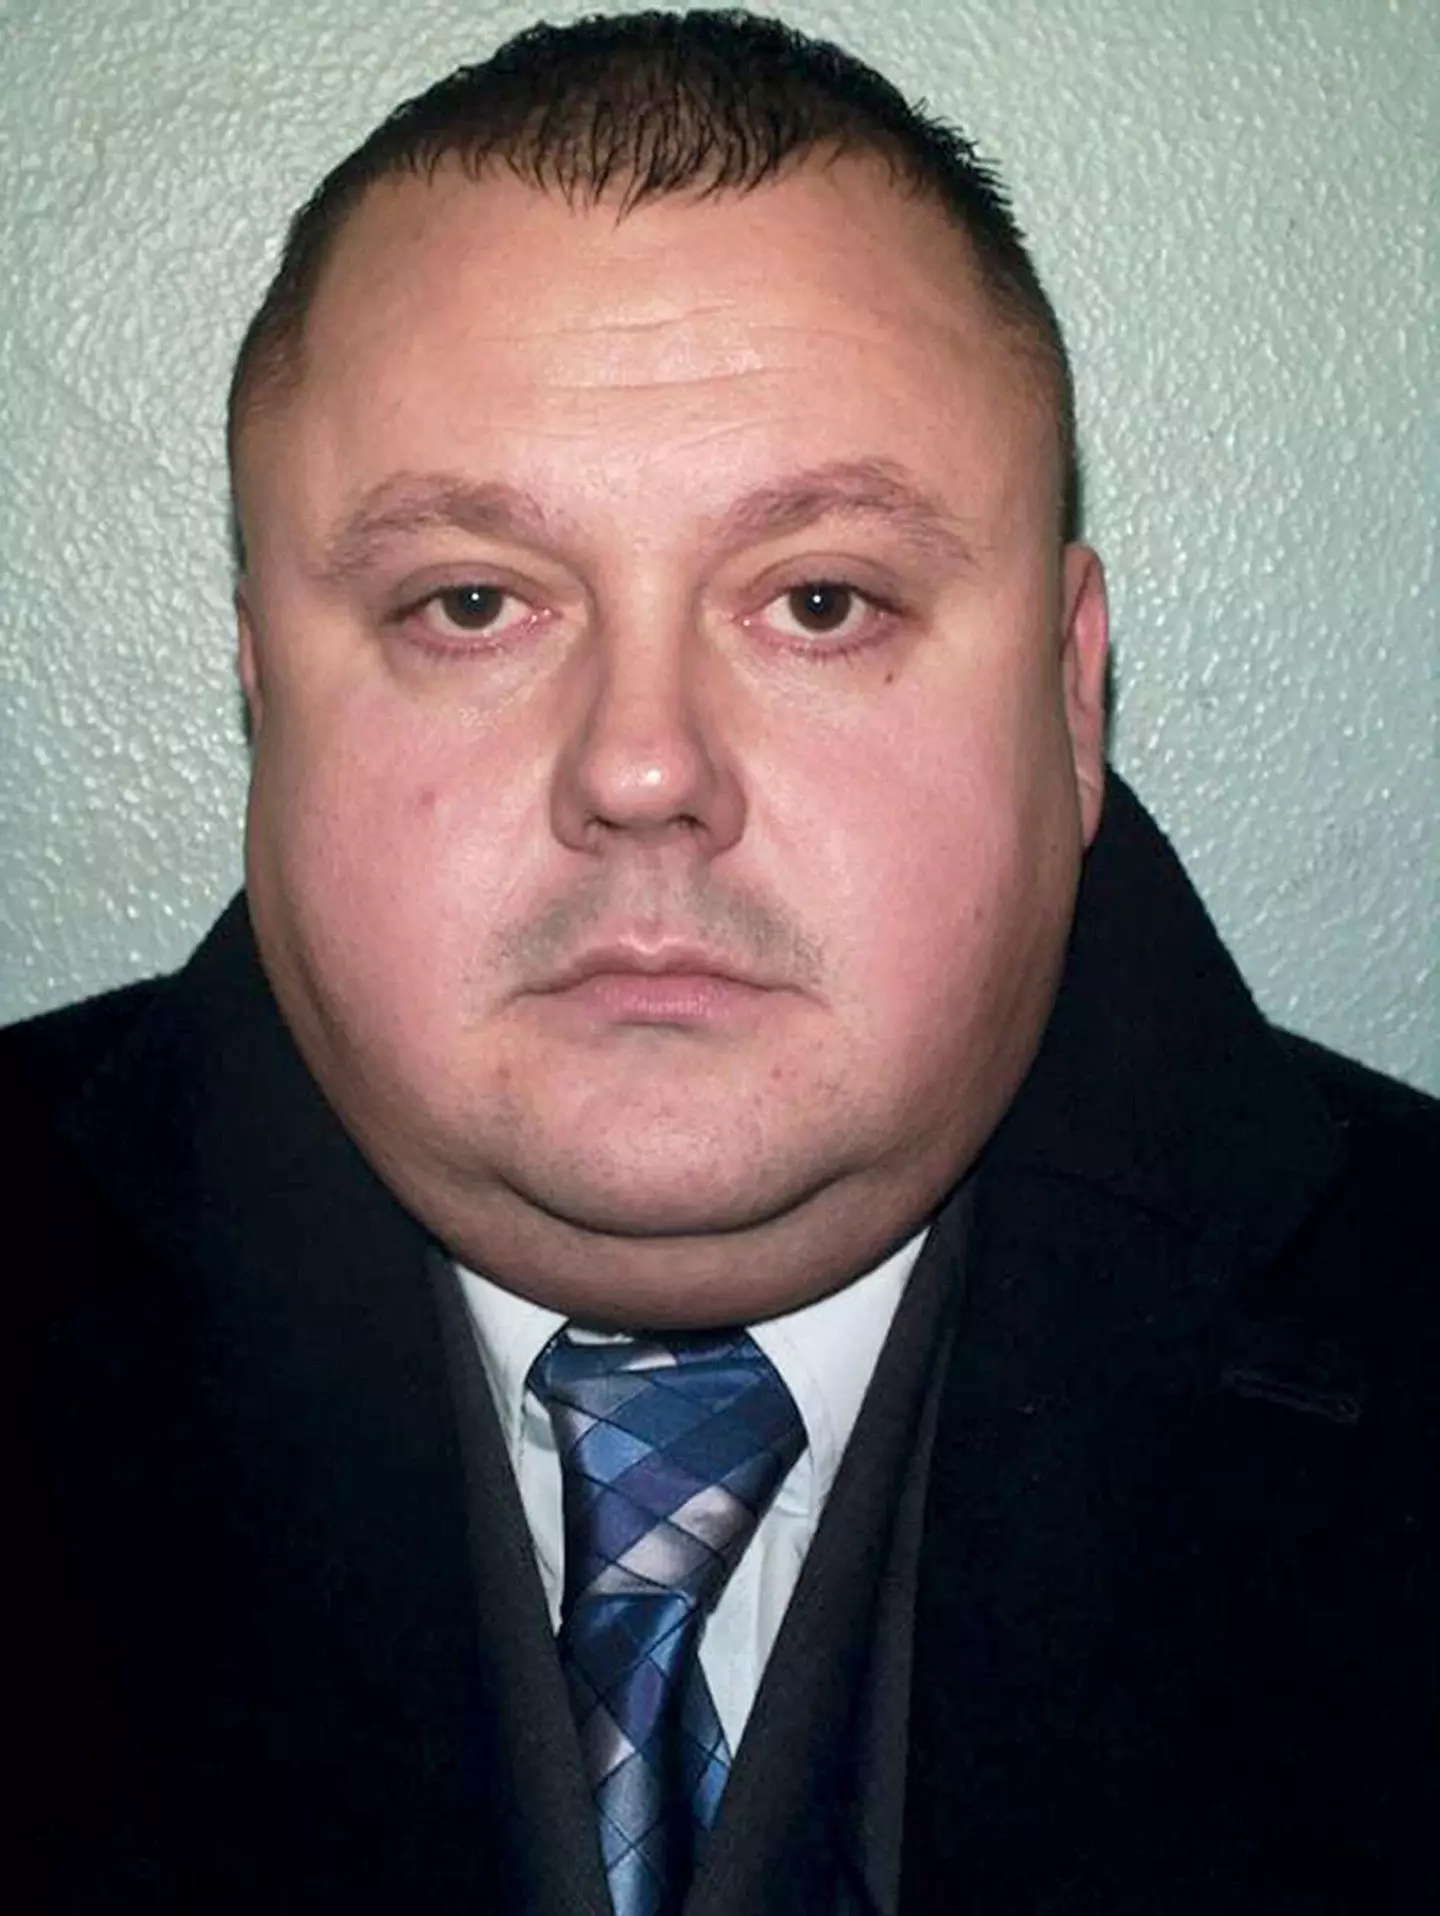 Levi Bellfield allegedly confessed to the murder of Chau.